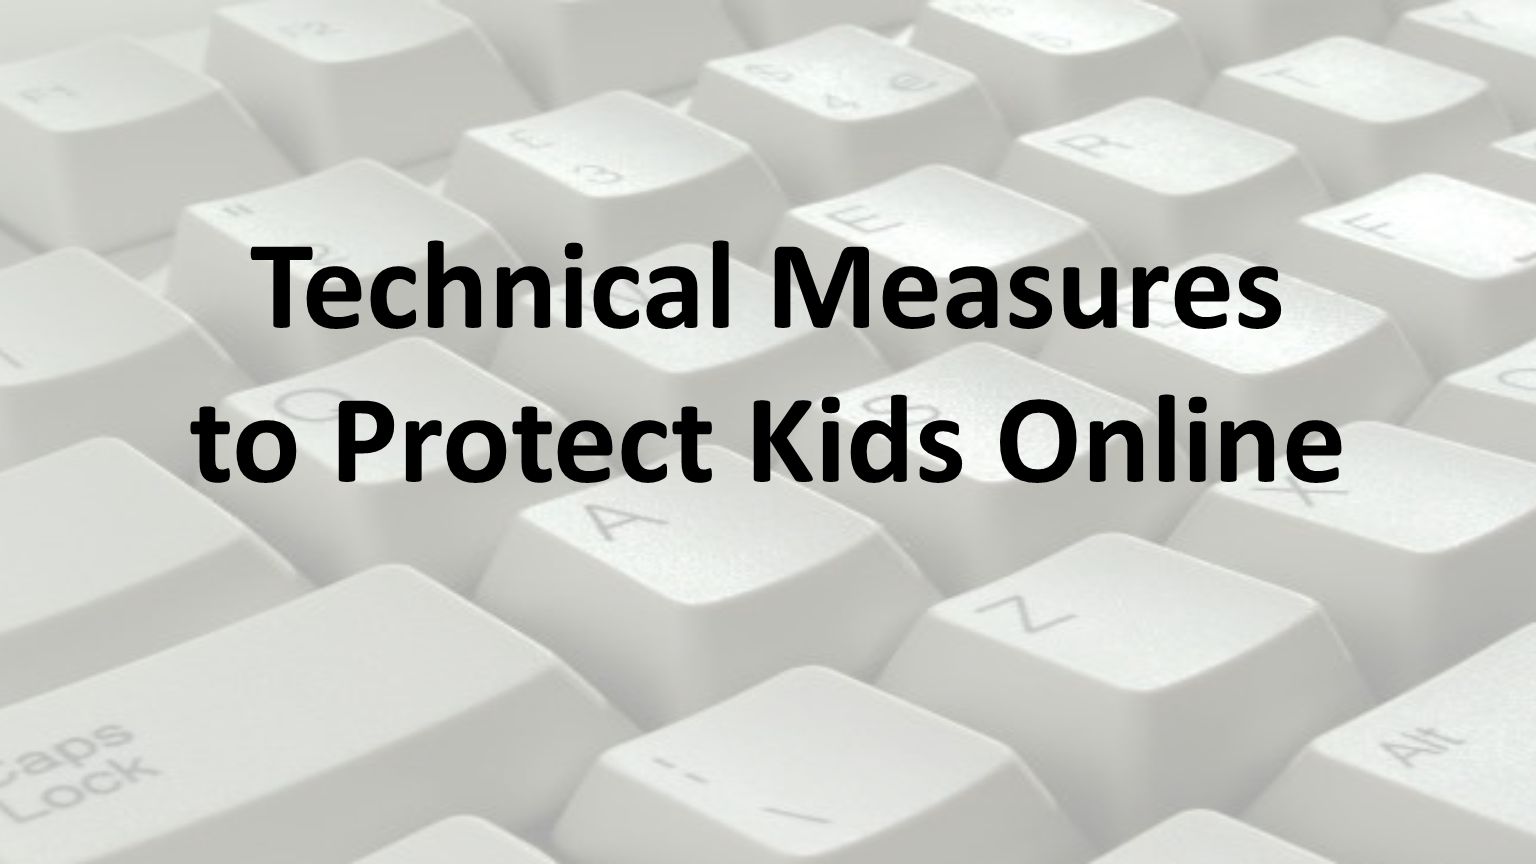 Technical Measures to Protect Kids Online